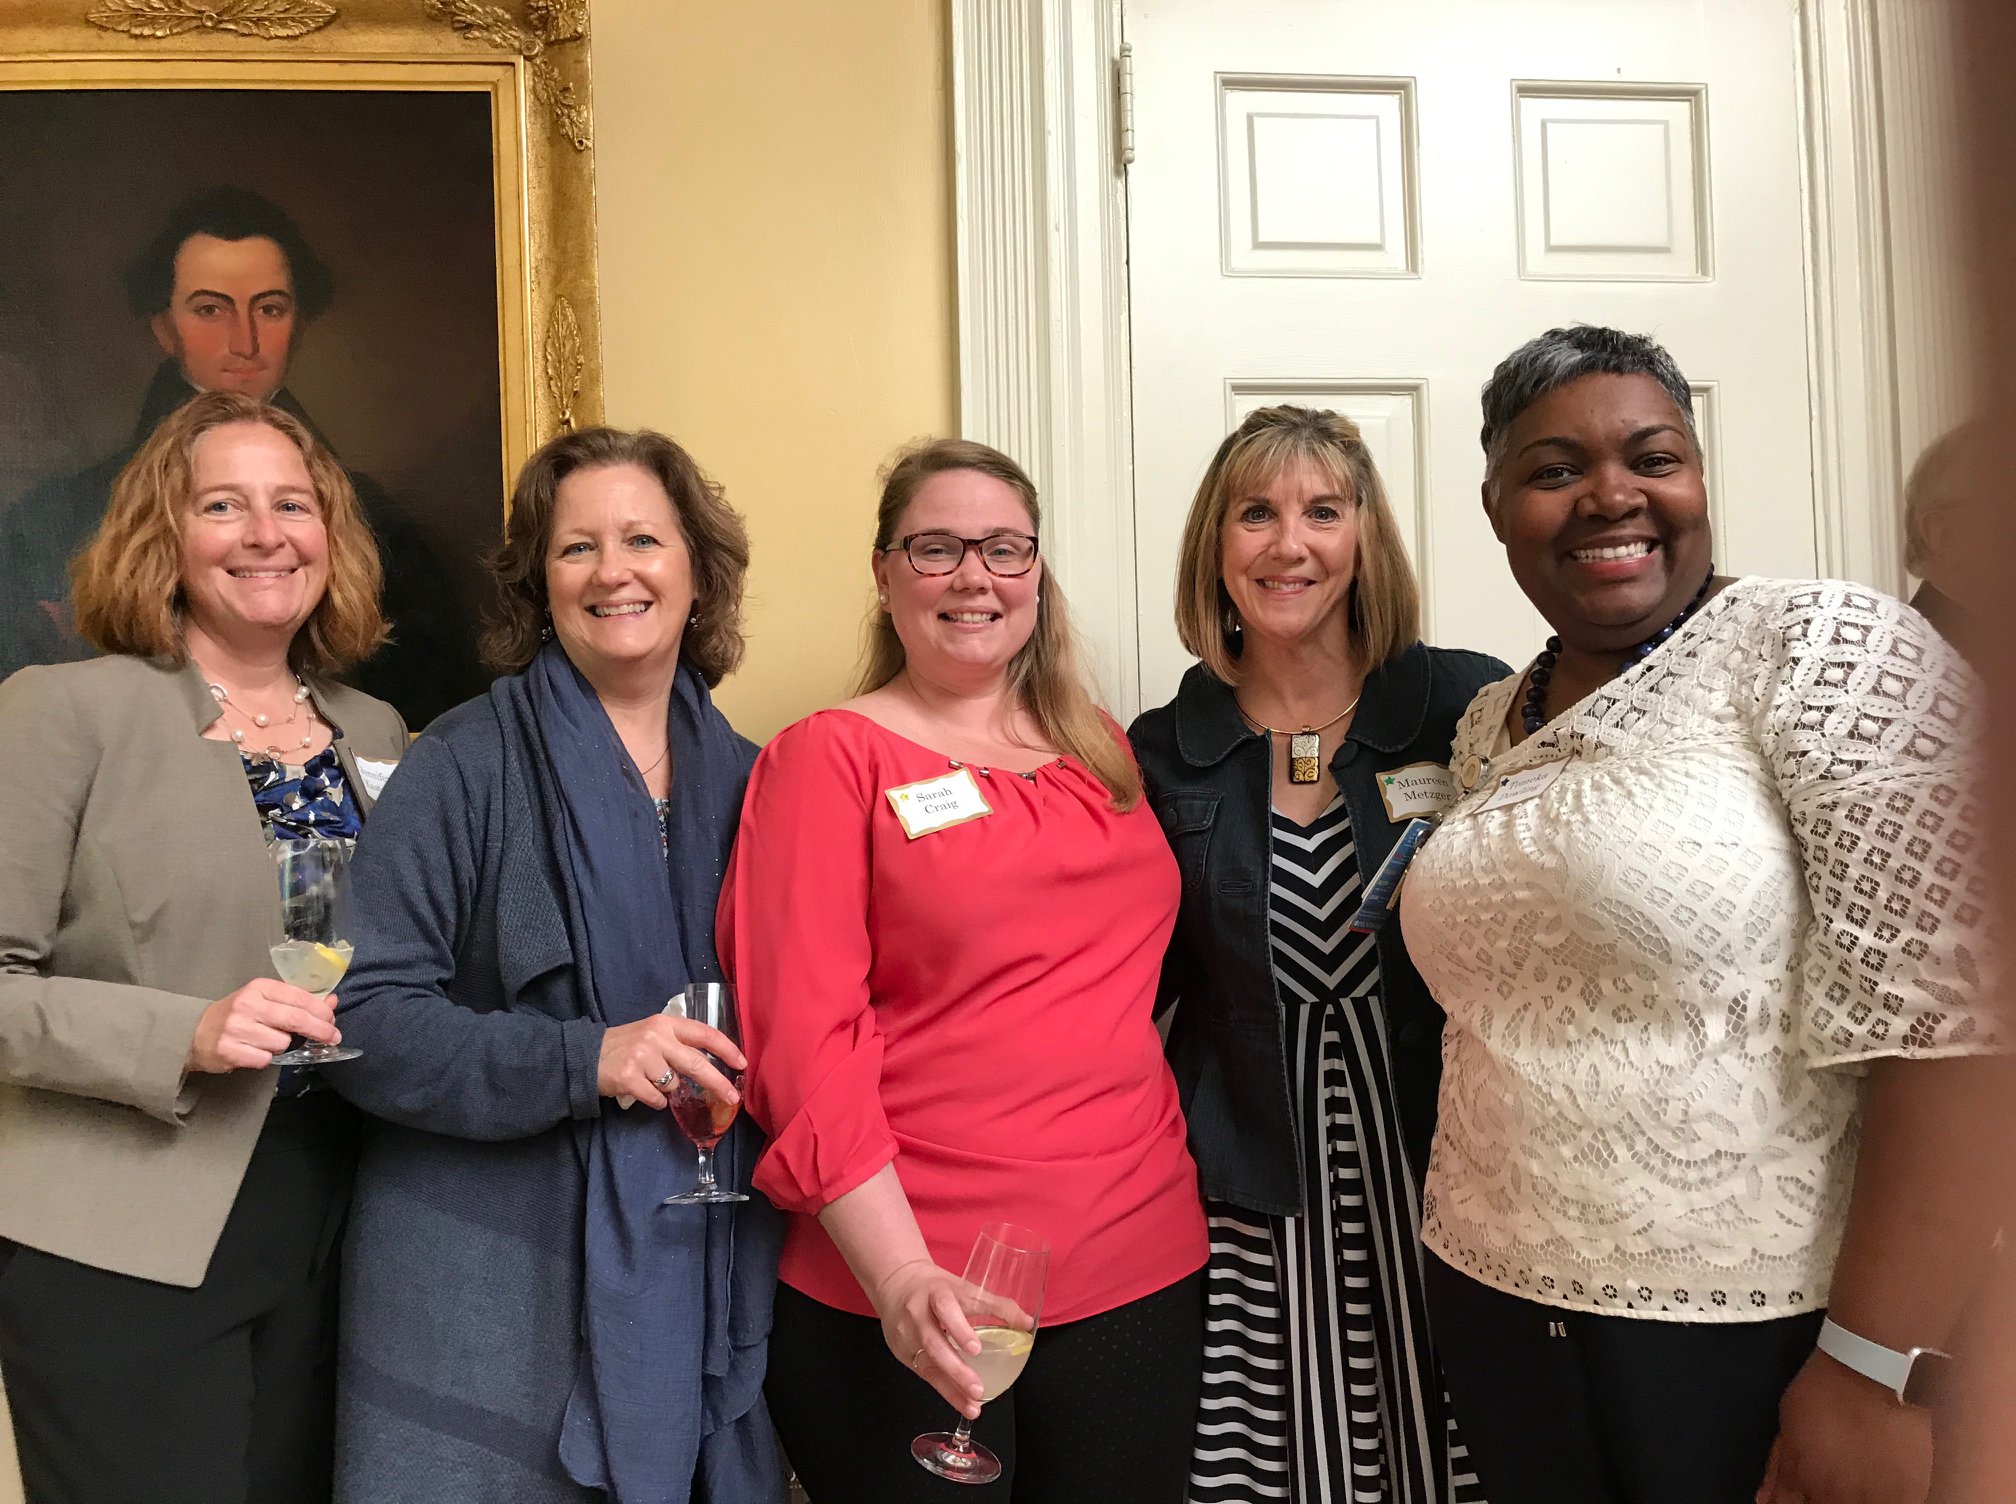 A photo of Jenn Kastello, Barb Reyna, Sarah Craig, Maureen Metzger, and Tomkea Dowling, from a Center for Teaching Excellence event May 15, 2019.